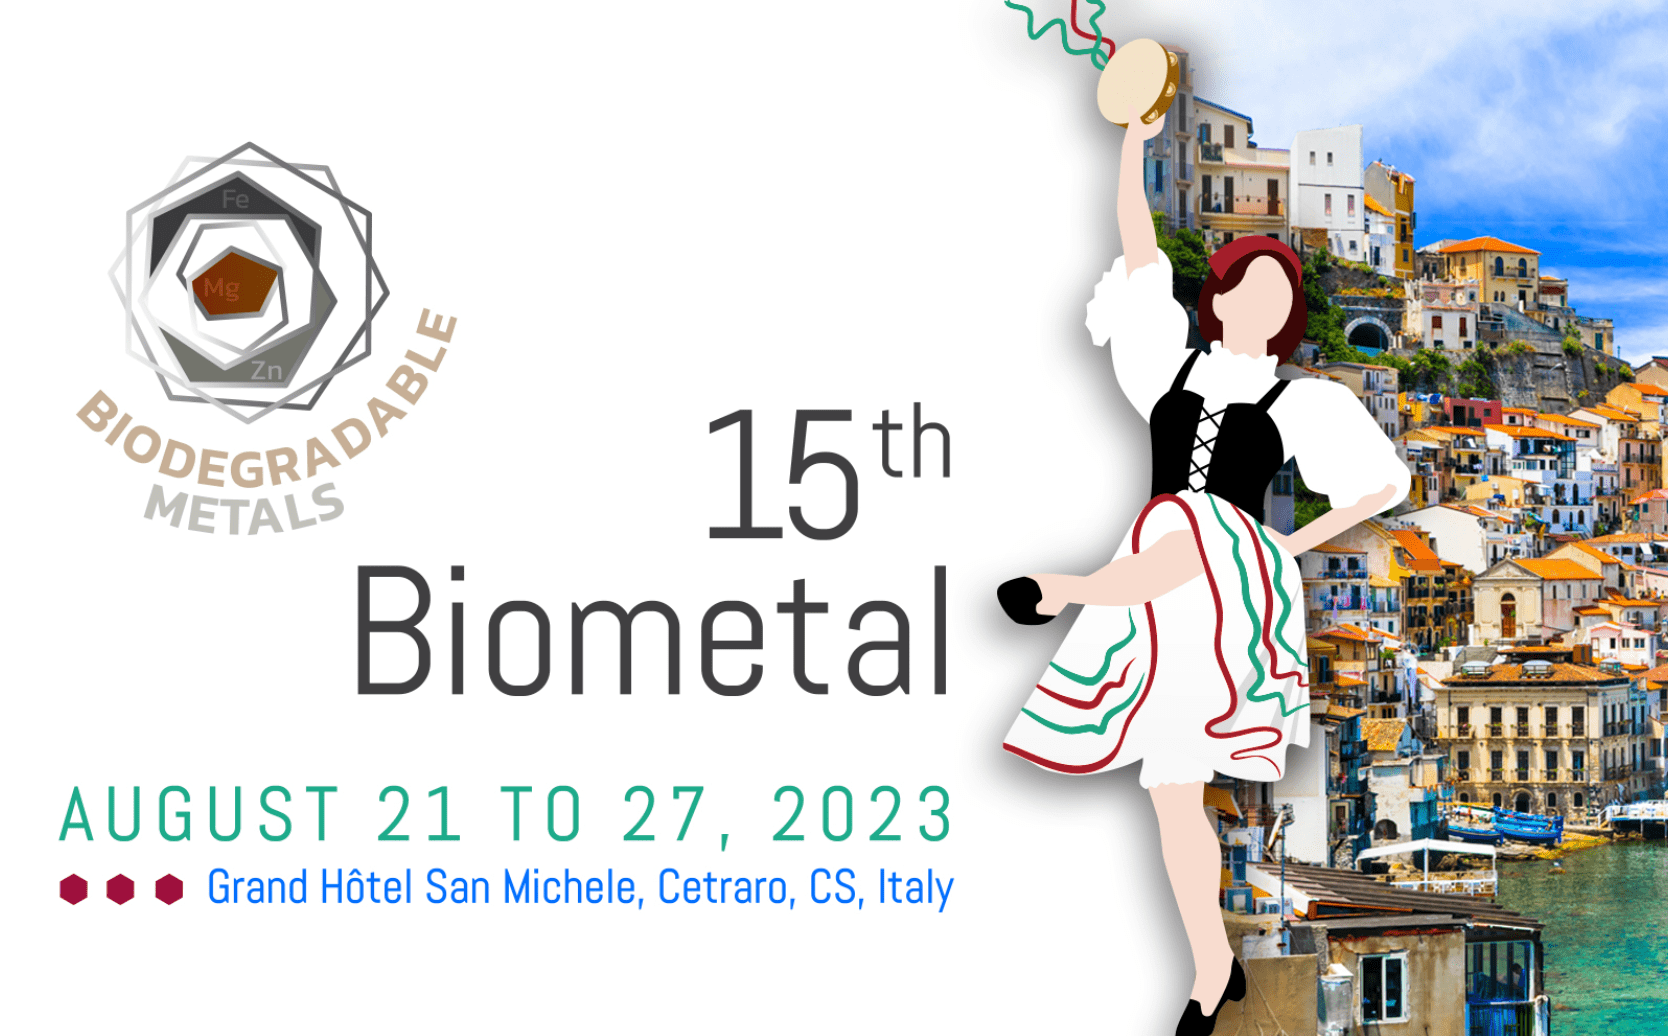 15th Symposium on Biodegradable Metals for Advanced Medical Applications